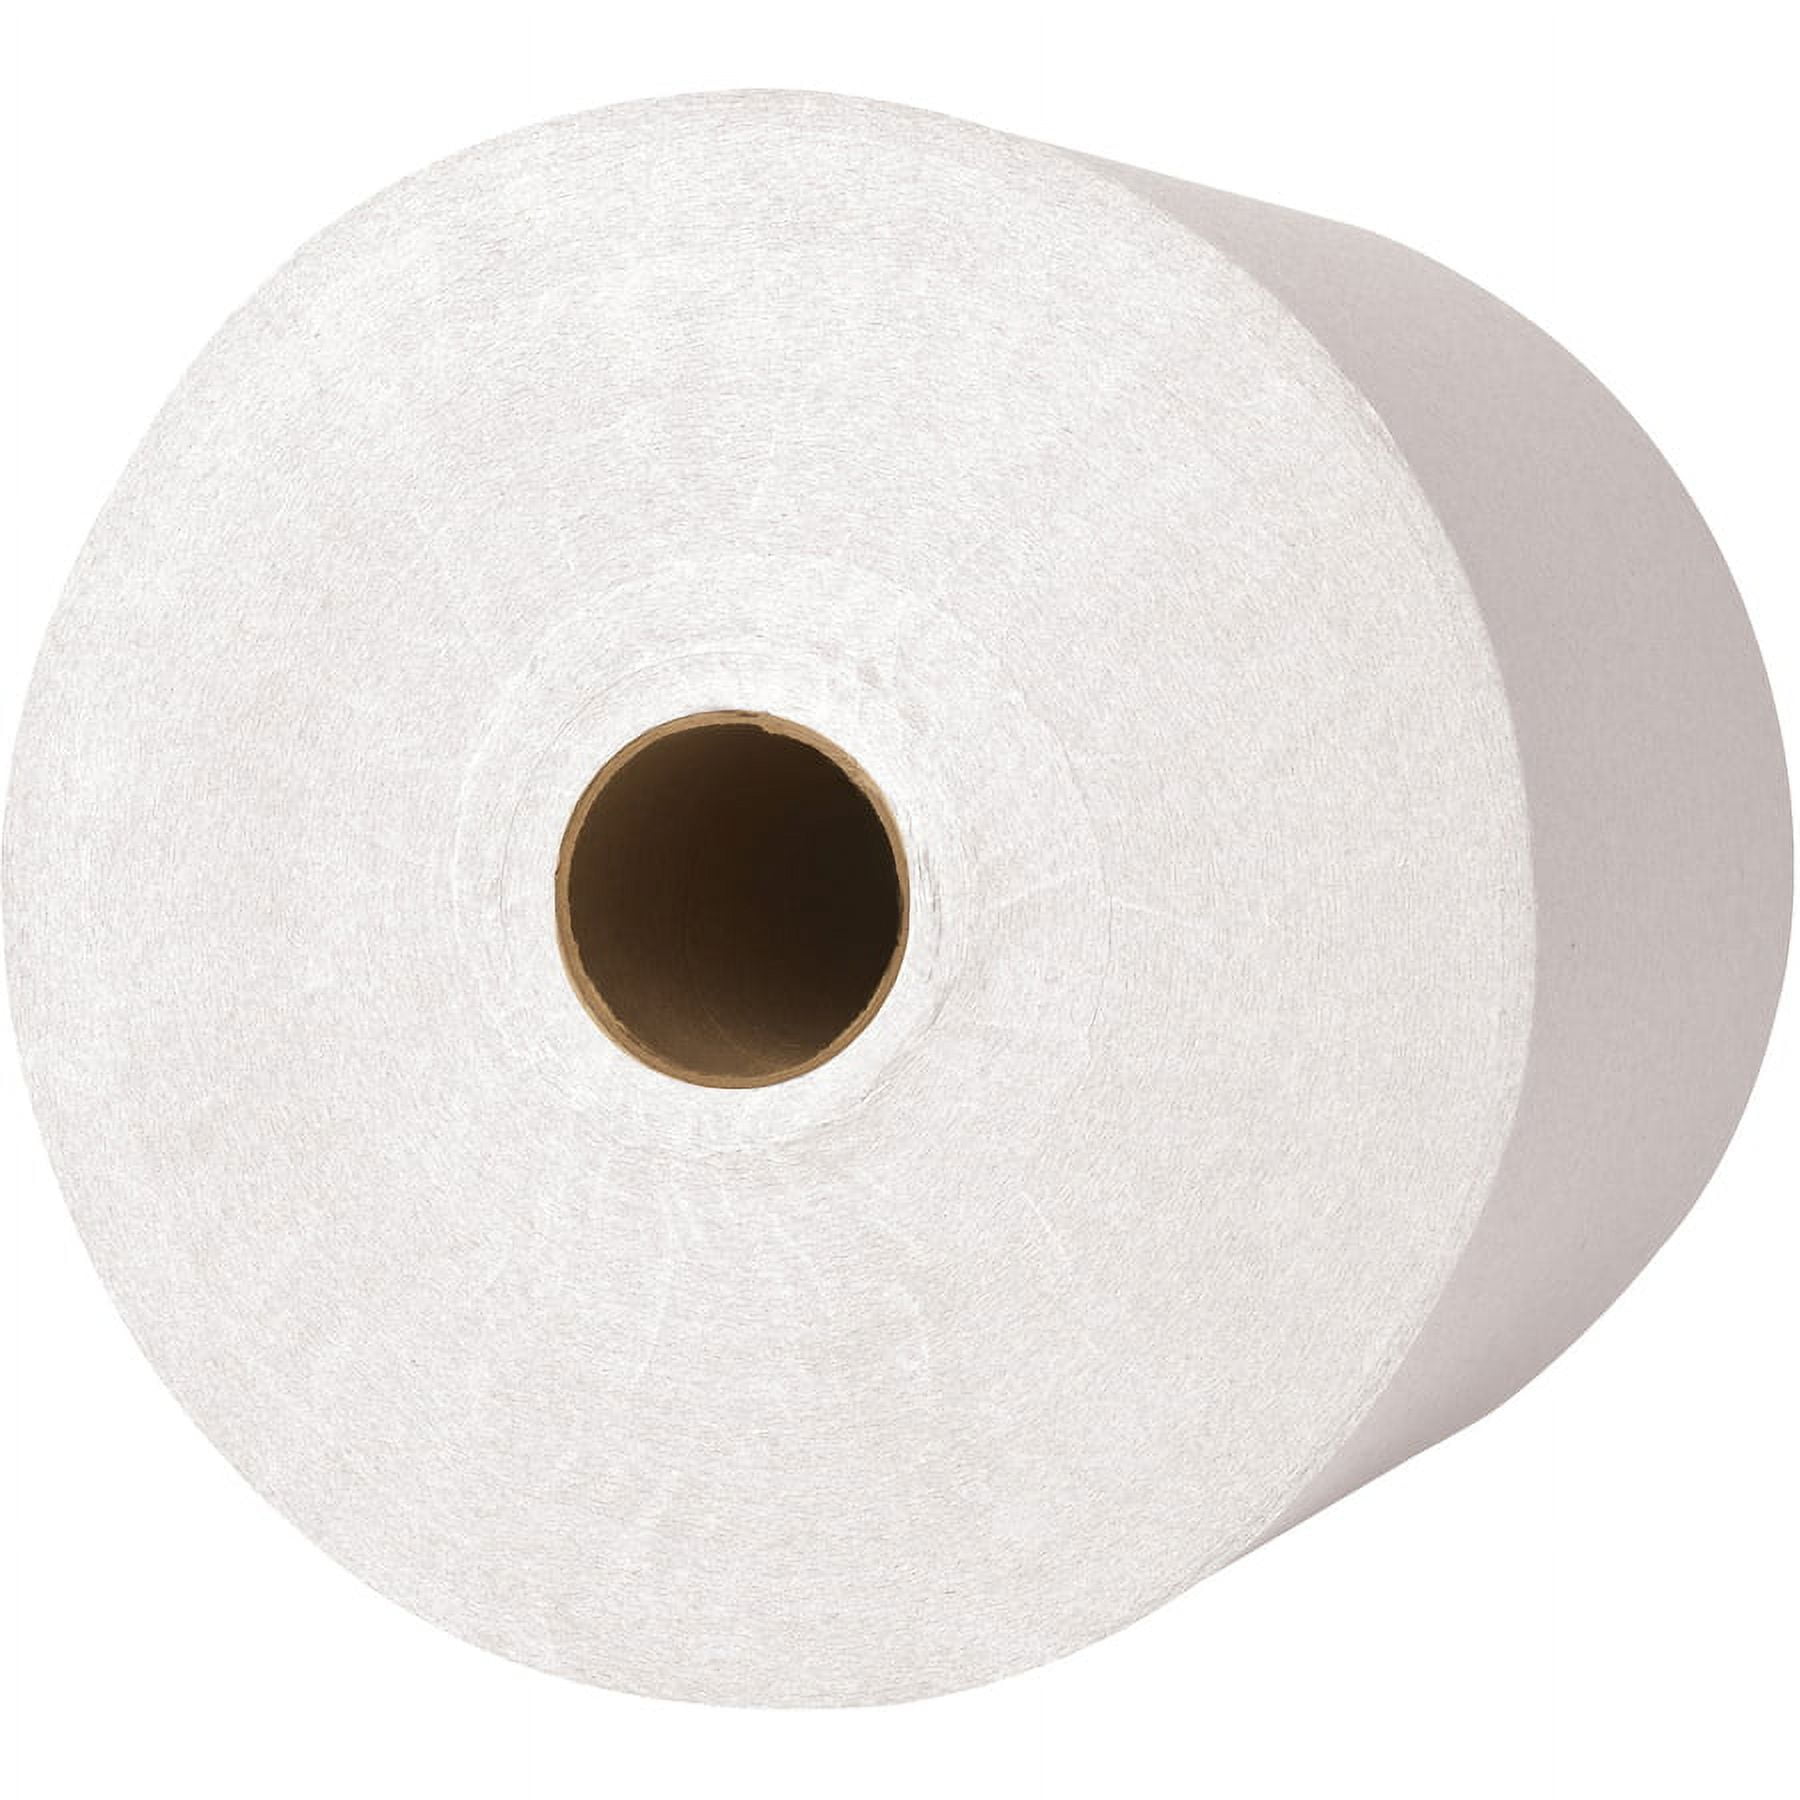 Low Lint Continuous Roll Paper Towels (500' roll)